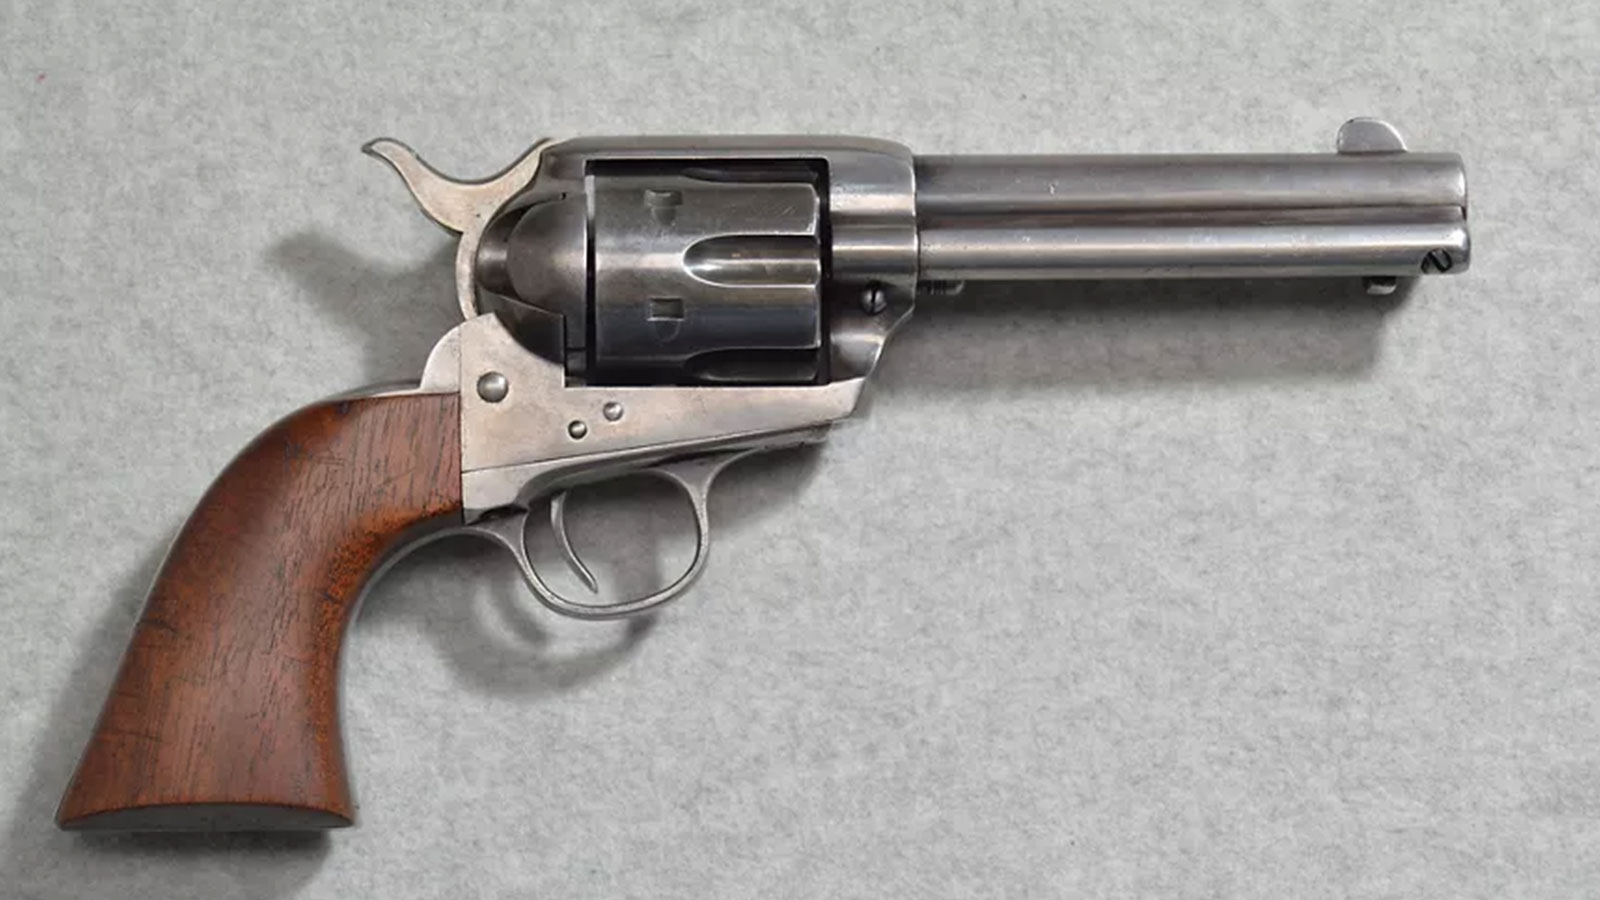 Colt’s Frontier Six Shooter was marketed to take advantage of people’s romantic ideas of the Wild West. Cabelas